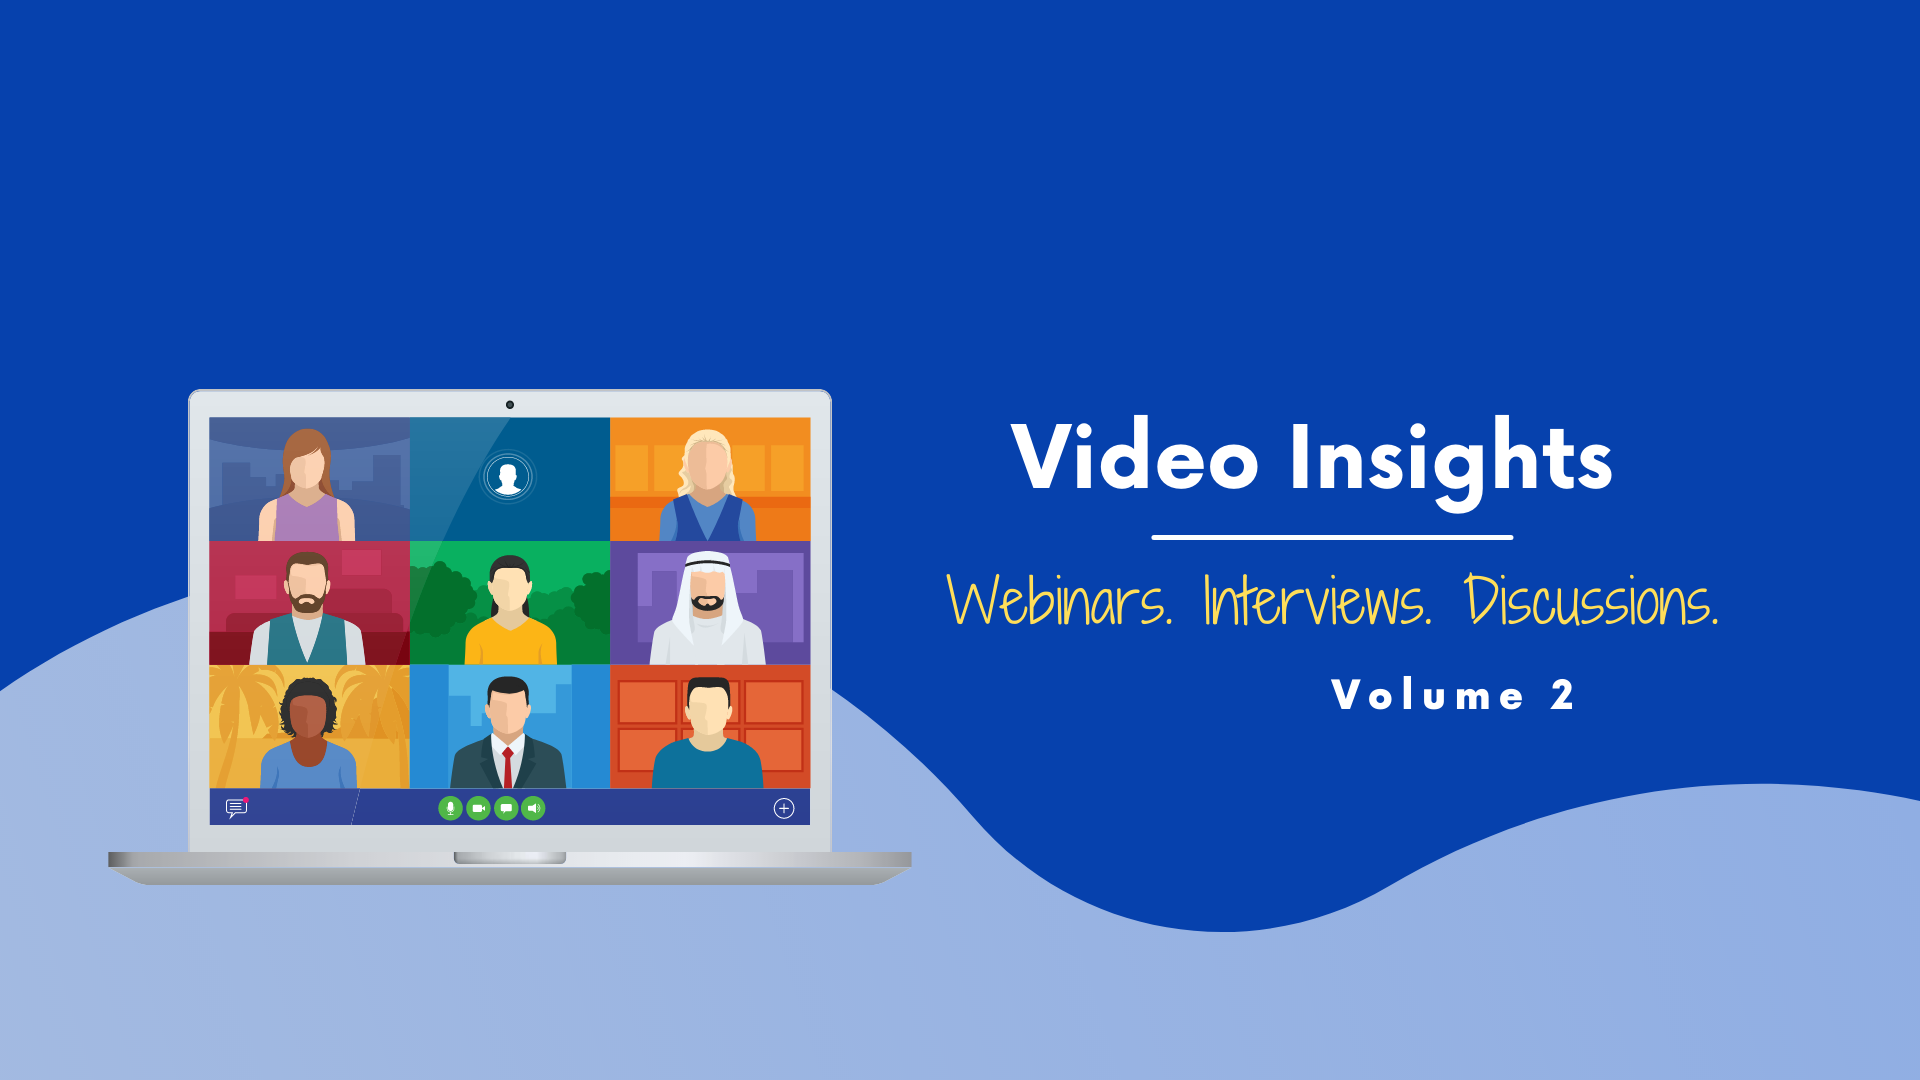 Video Insights: Webinars & Discussions (Volume 2)